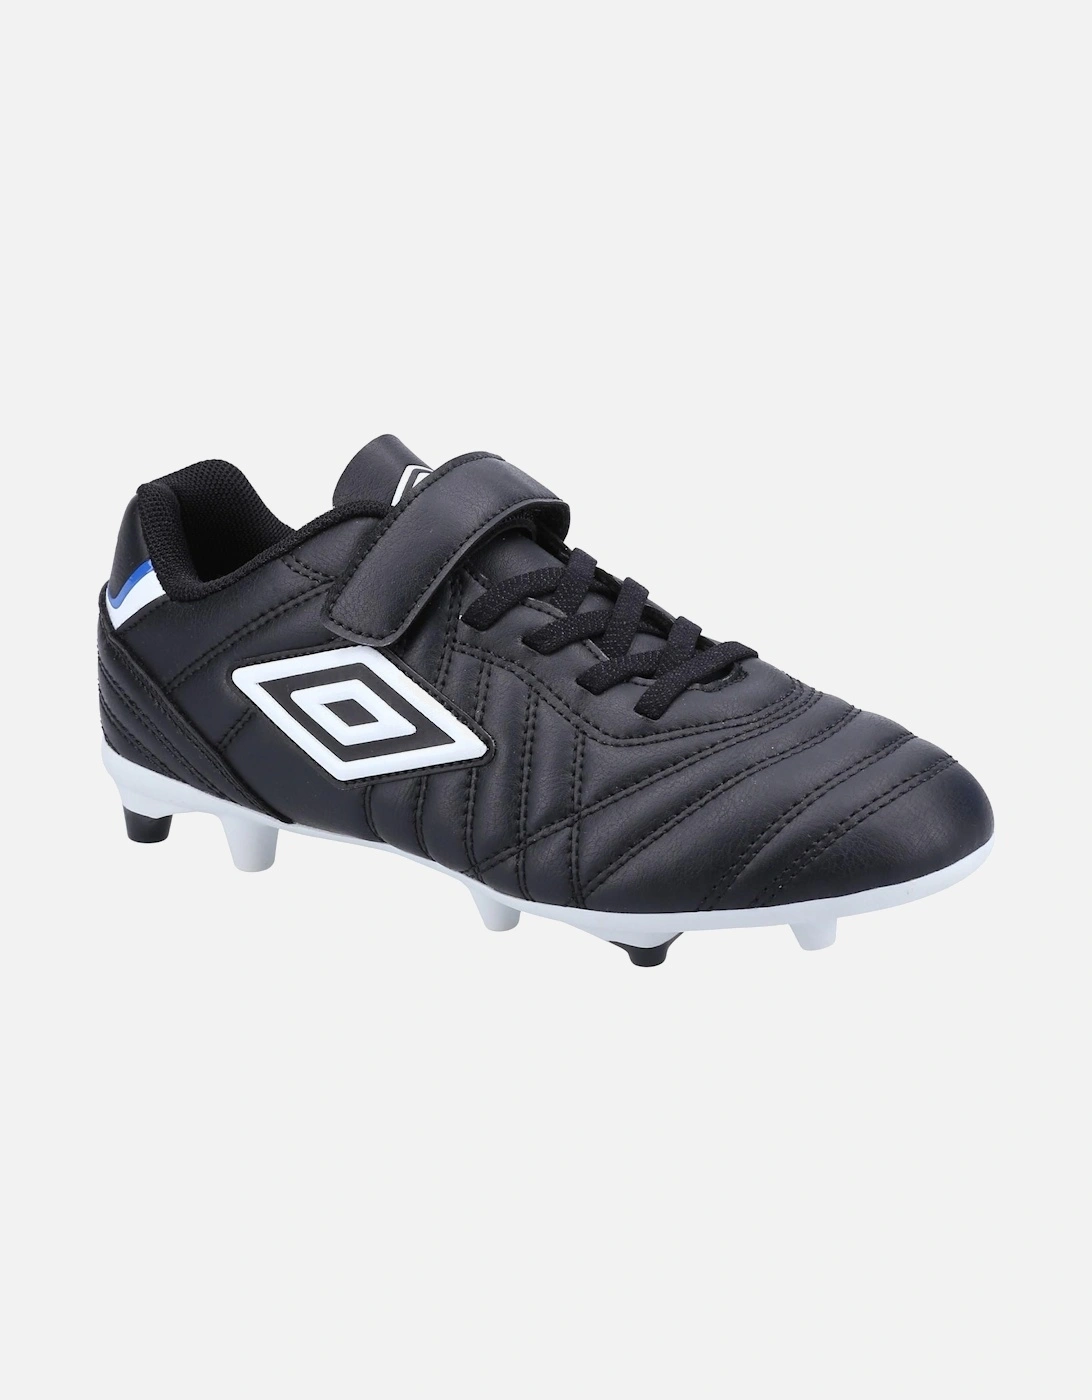 Childrens/Kids Speciali Liga Firm Leather Football Boots, 5 of 4